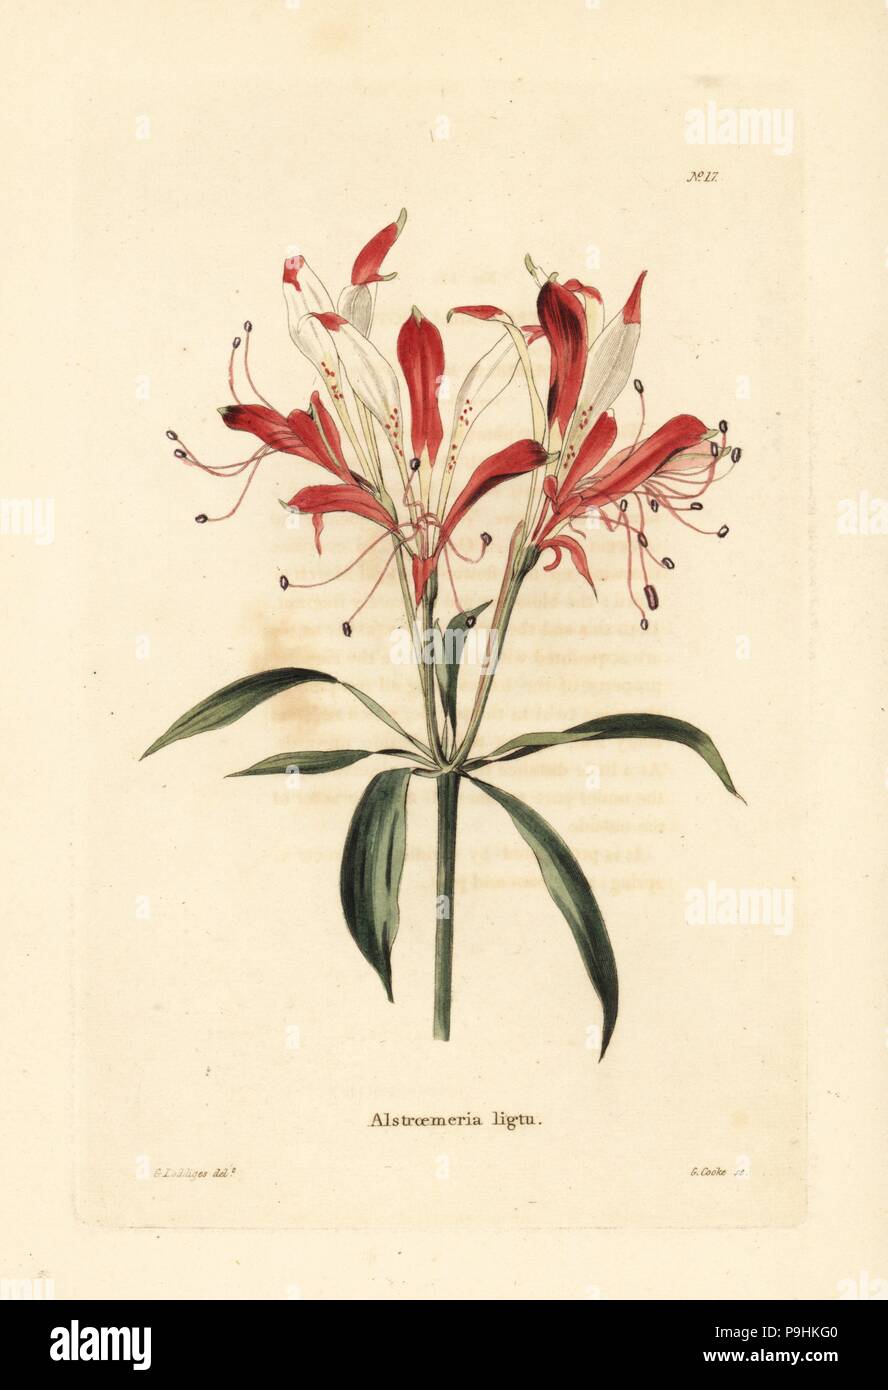 St. Martin's flower or Peruvian lily, Alstroemeria ligtu. Handcoloured copperplate engraving by George Cooke after George Loddiges from Conrad Loddiges' Botanical Cabinet, Hackney, 1817. Stock Photo